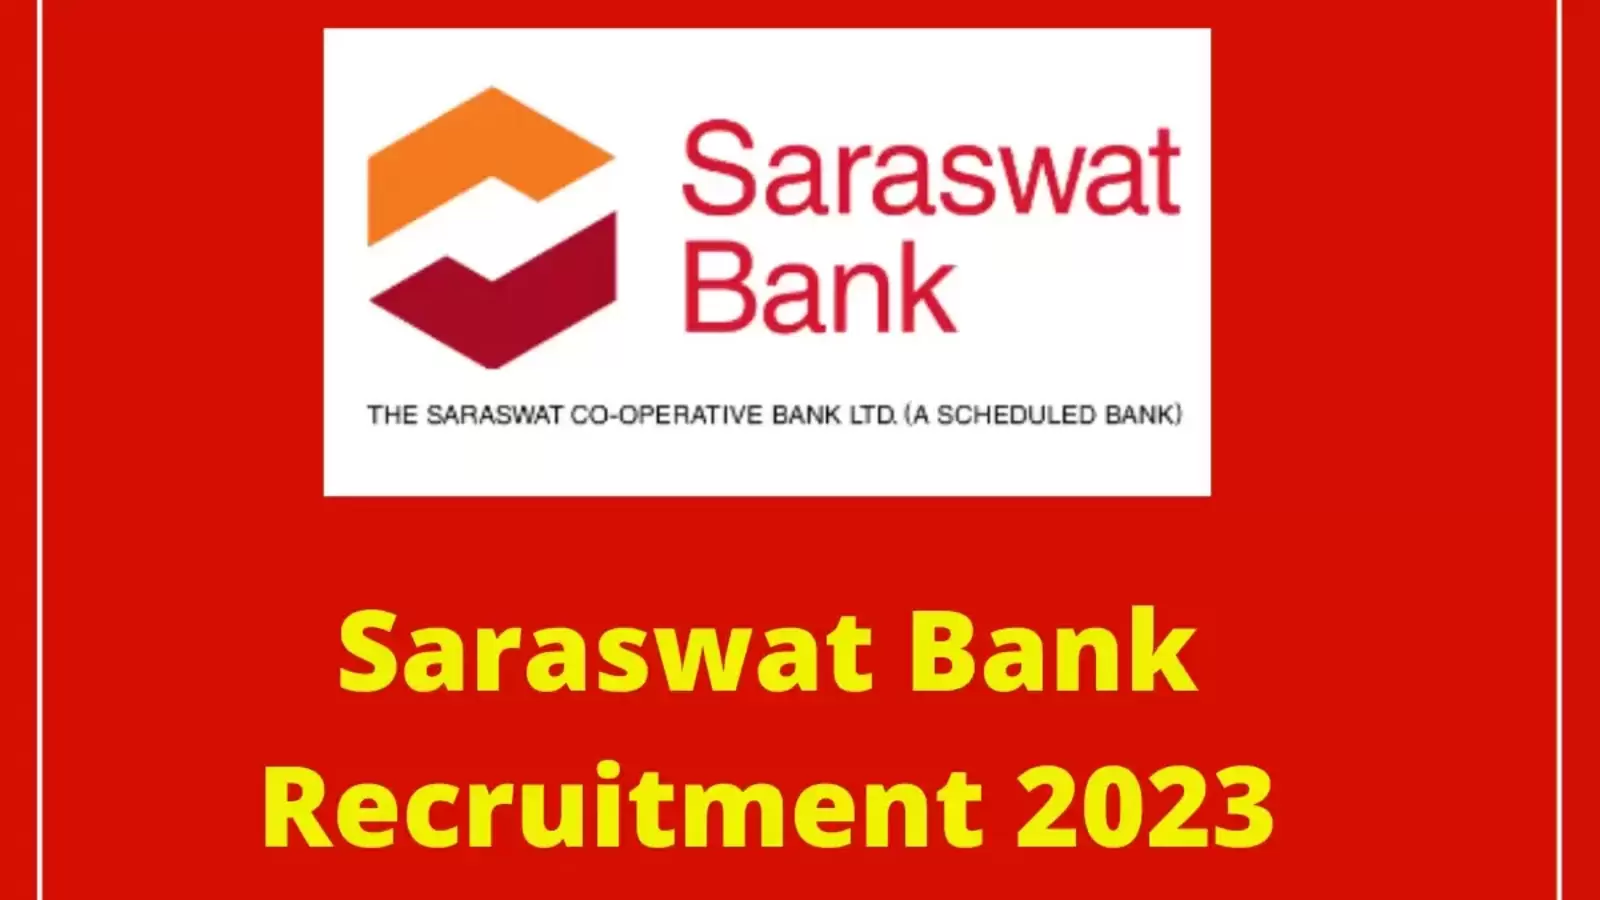 Interest on loans reduced with benefits like no other Saraswat Bank at the  forefront-ANI - BW Businessworld